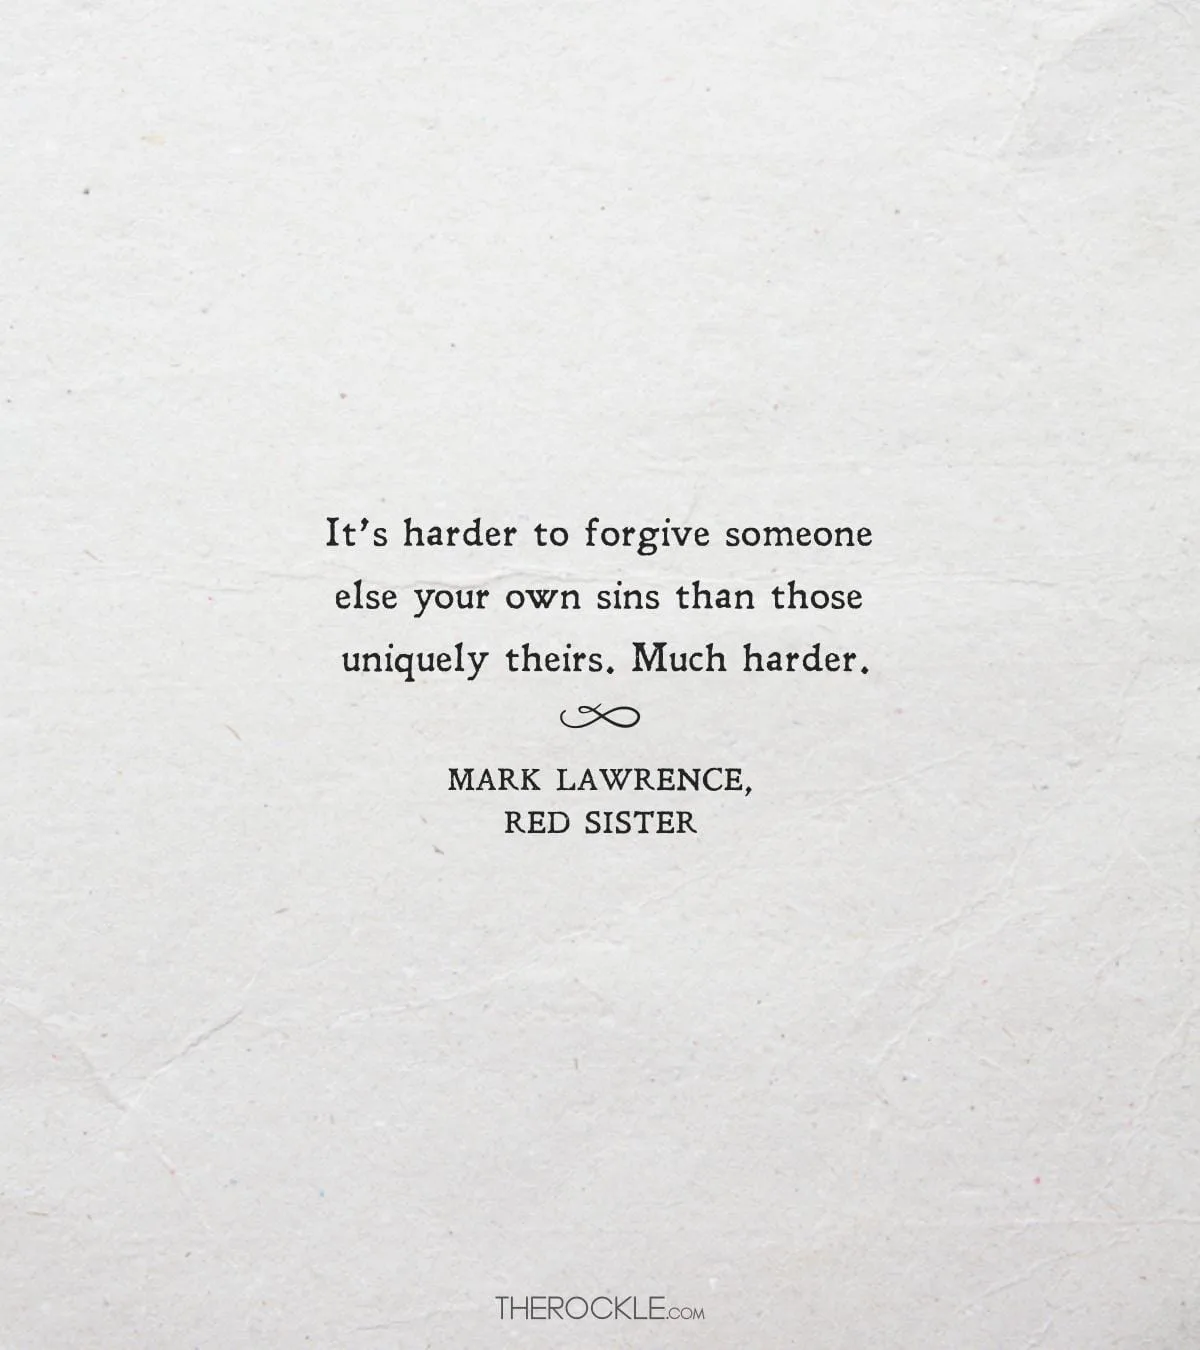 Mark Lawrence quote about forgiveness